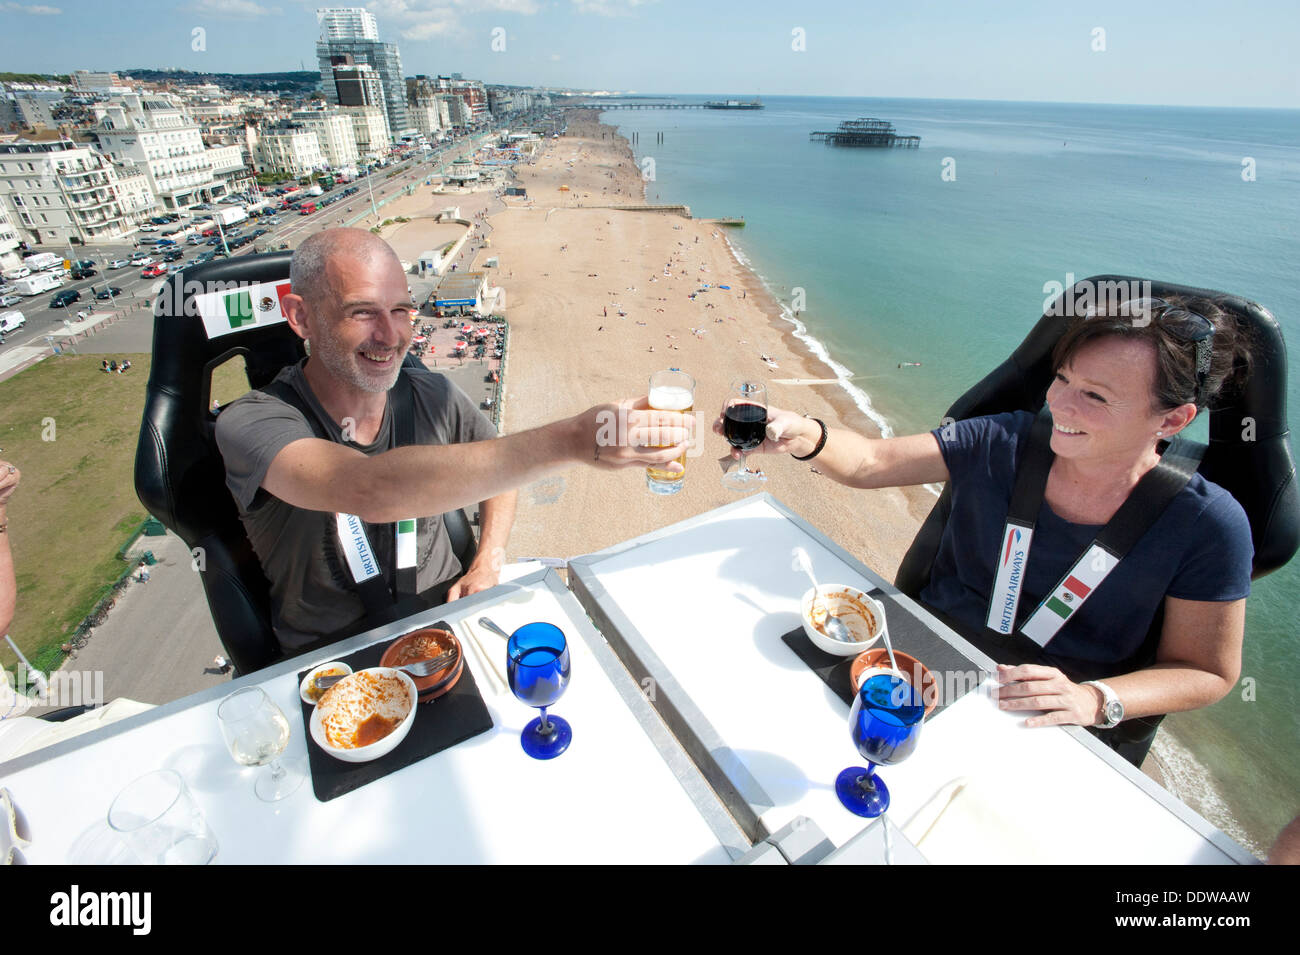 Diners enjoy eating at a high-flying dining table dangling from a crane 100 foot high in the sky above Brighton and Hove beach. Stock Photo